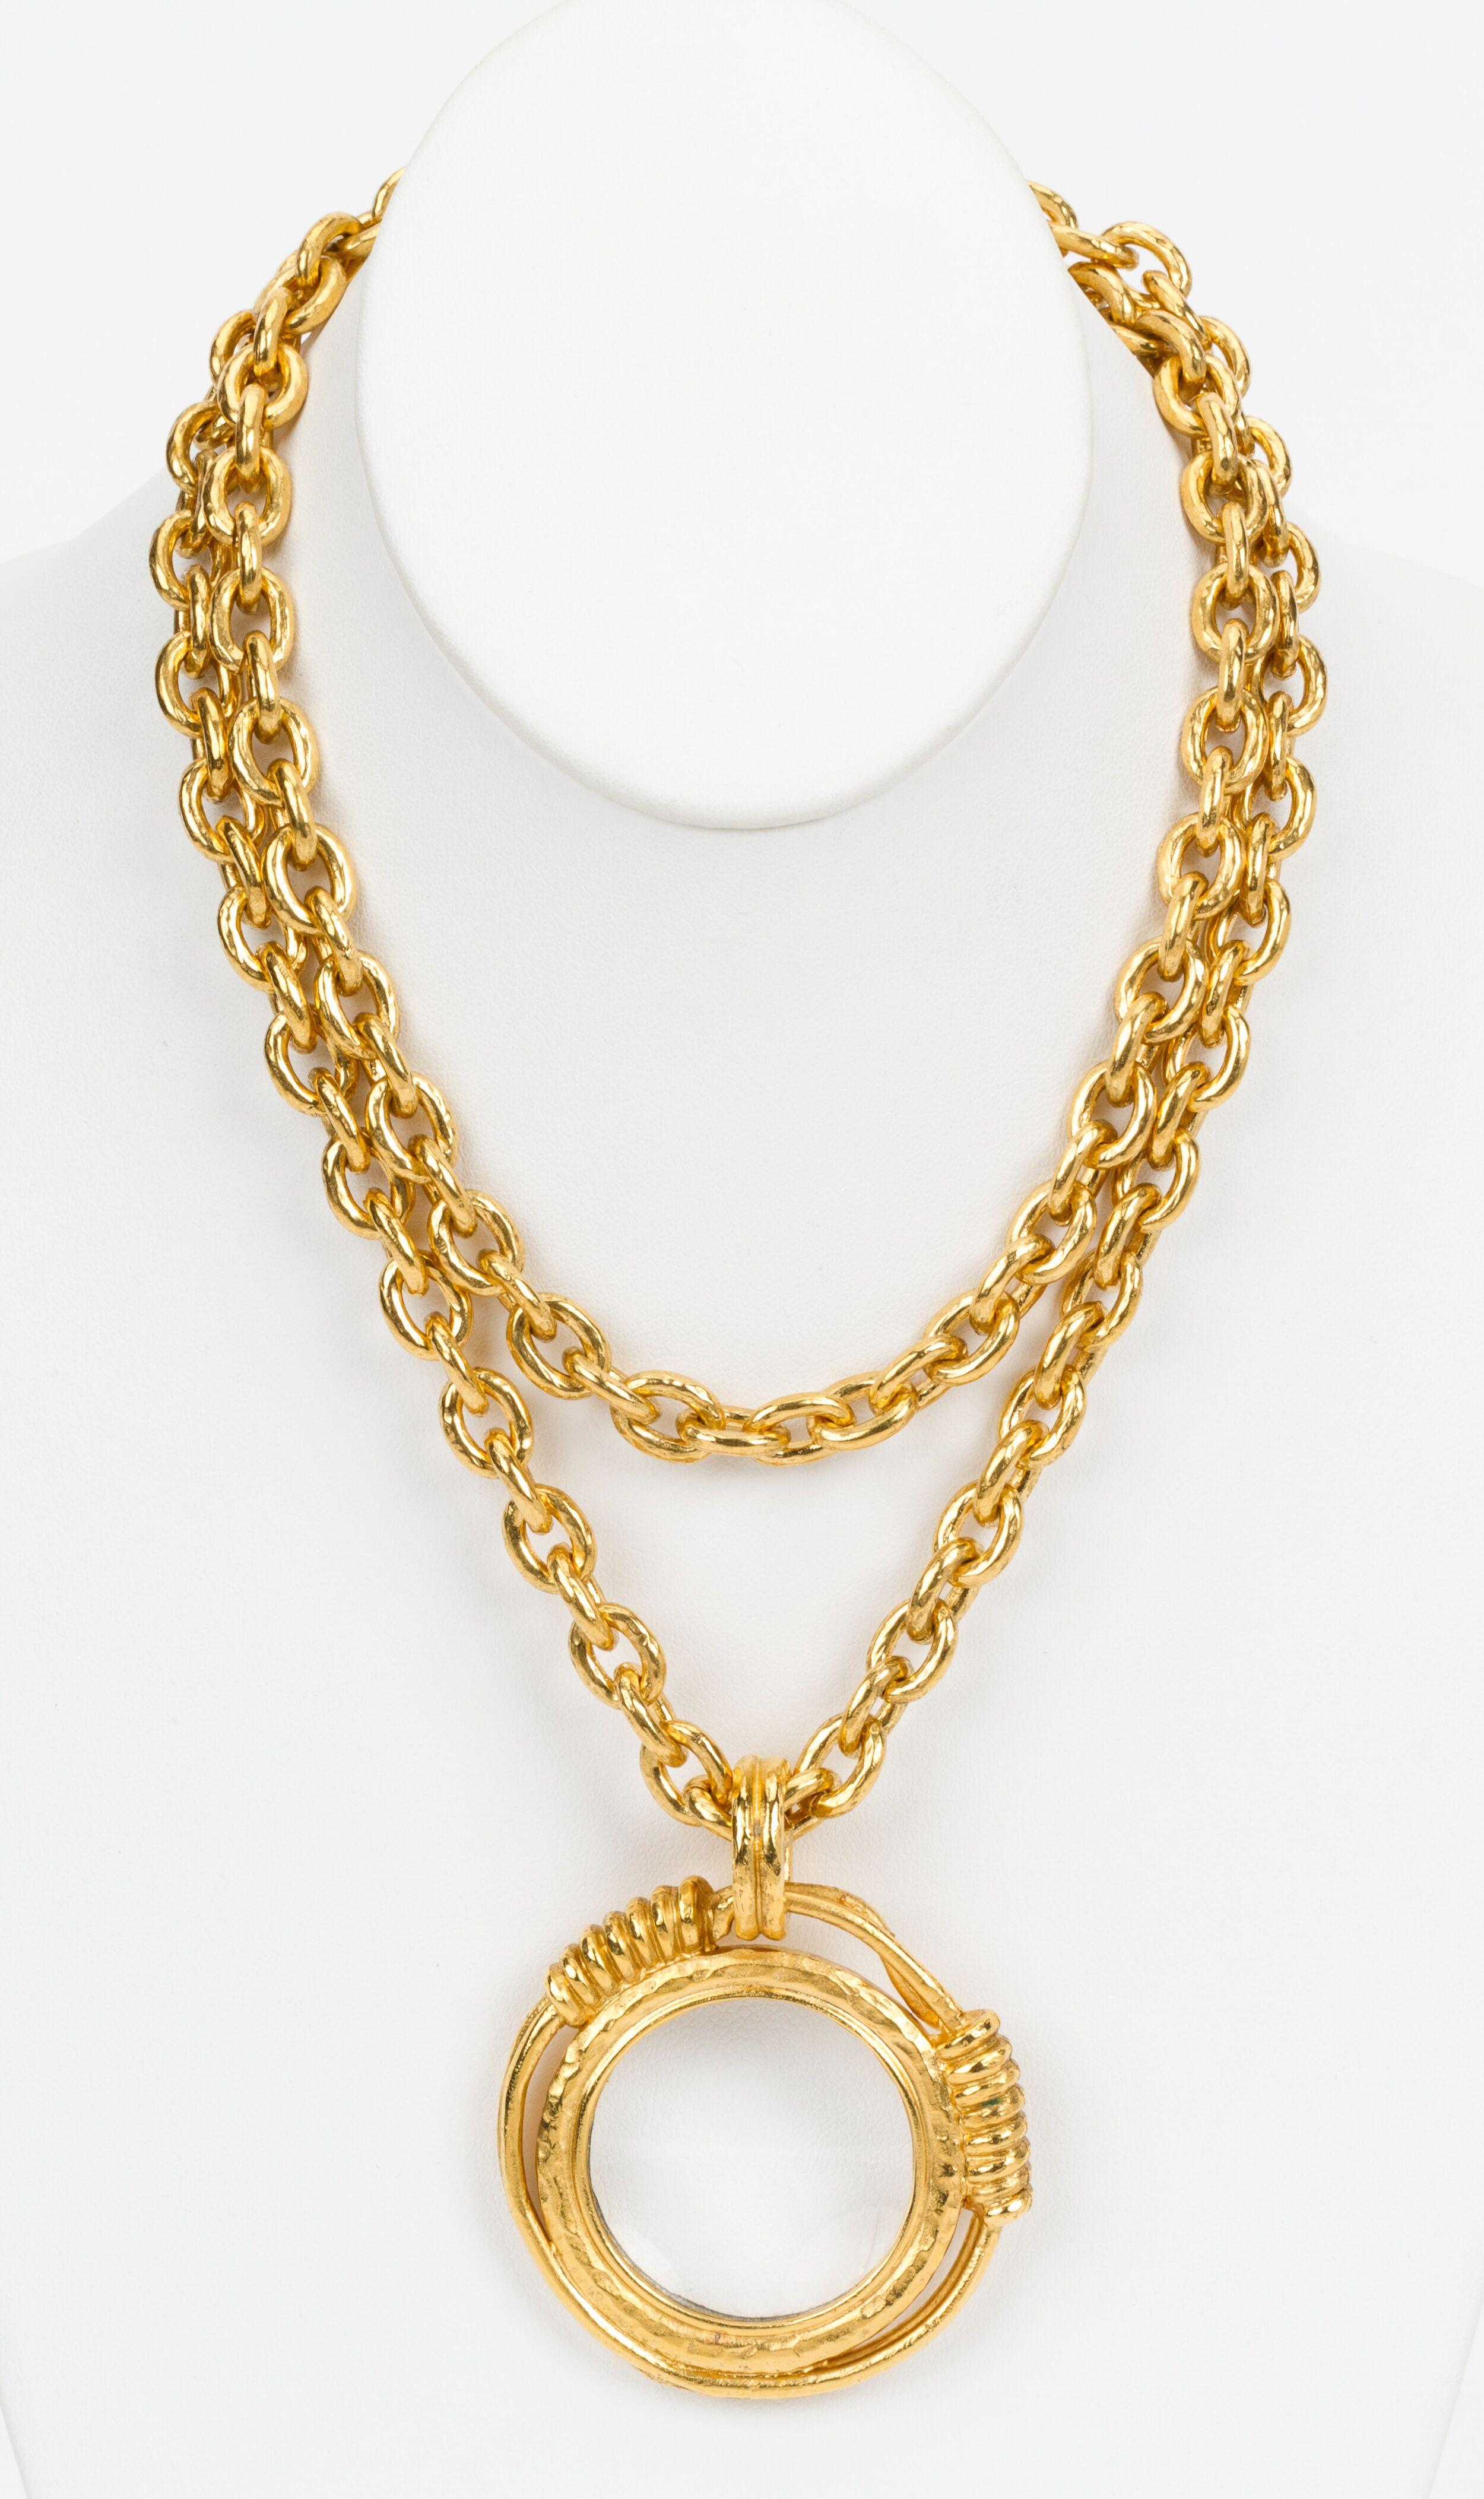 Chanel Satin Gold 80s Magnifier Necklace In Excellent Condition For Sale In West Hollywood, CA